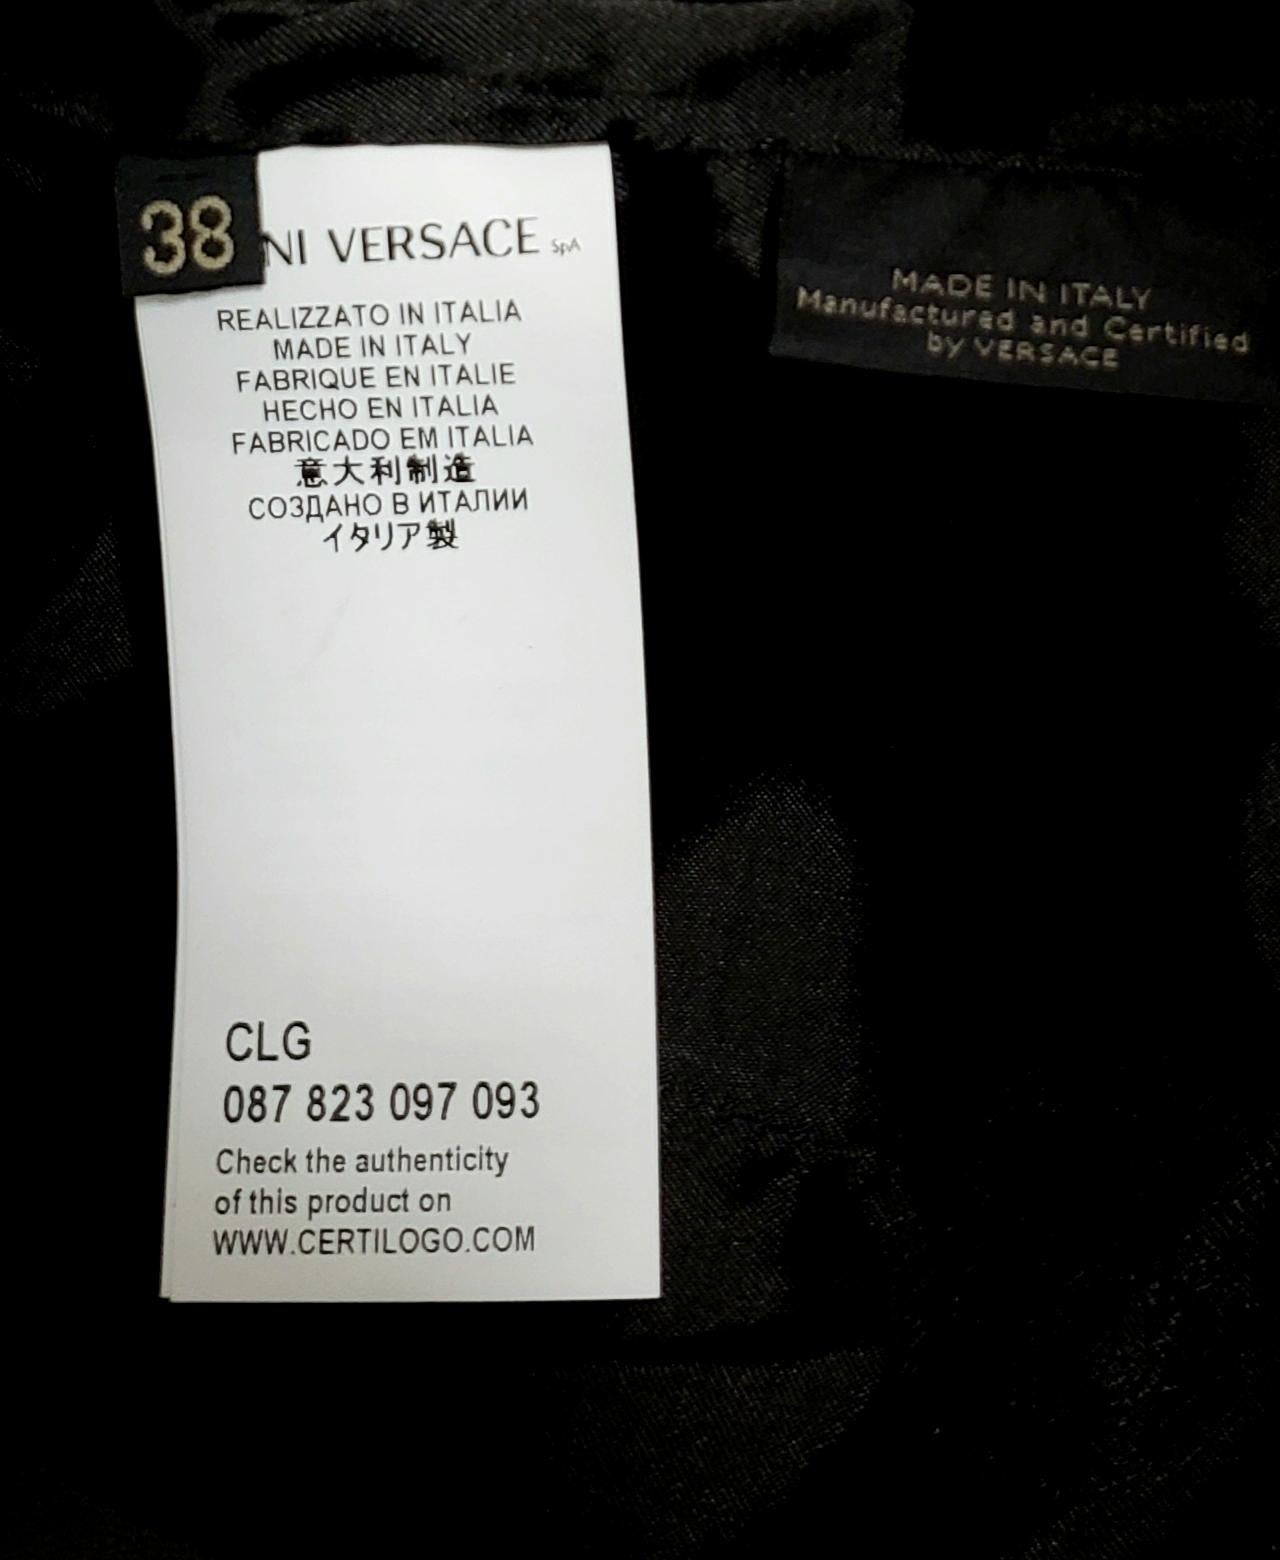 New VERSACE CUTOUT BLACK LEATHER DRESS 38 - 2 For Sale 3